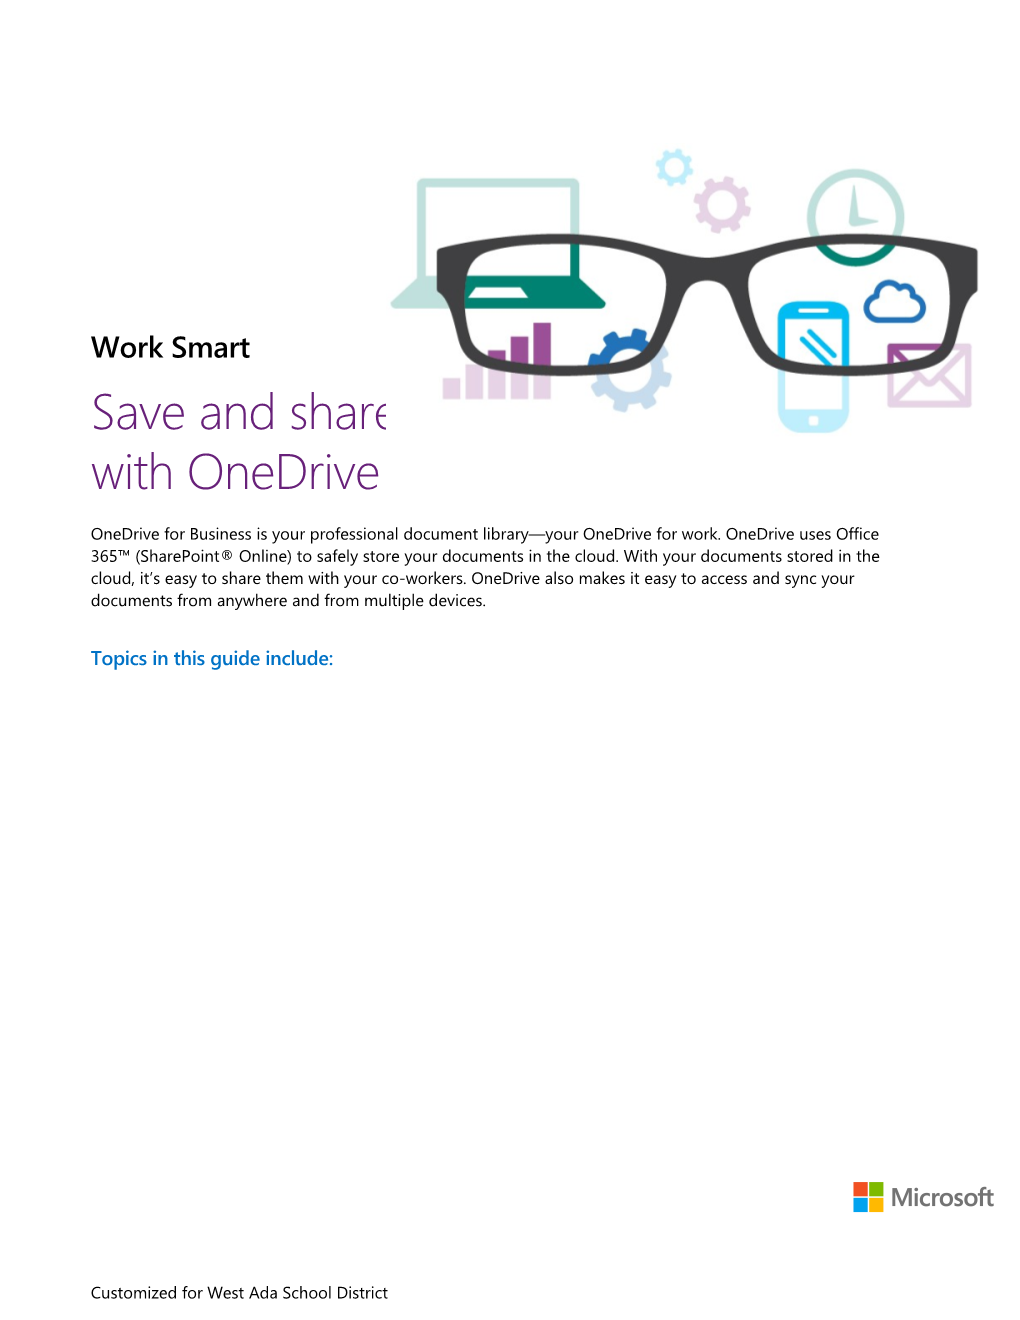 Work Smart: Save and Share Documents in the Cloud with Onedrive